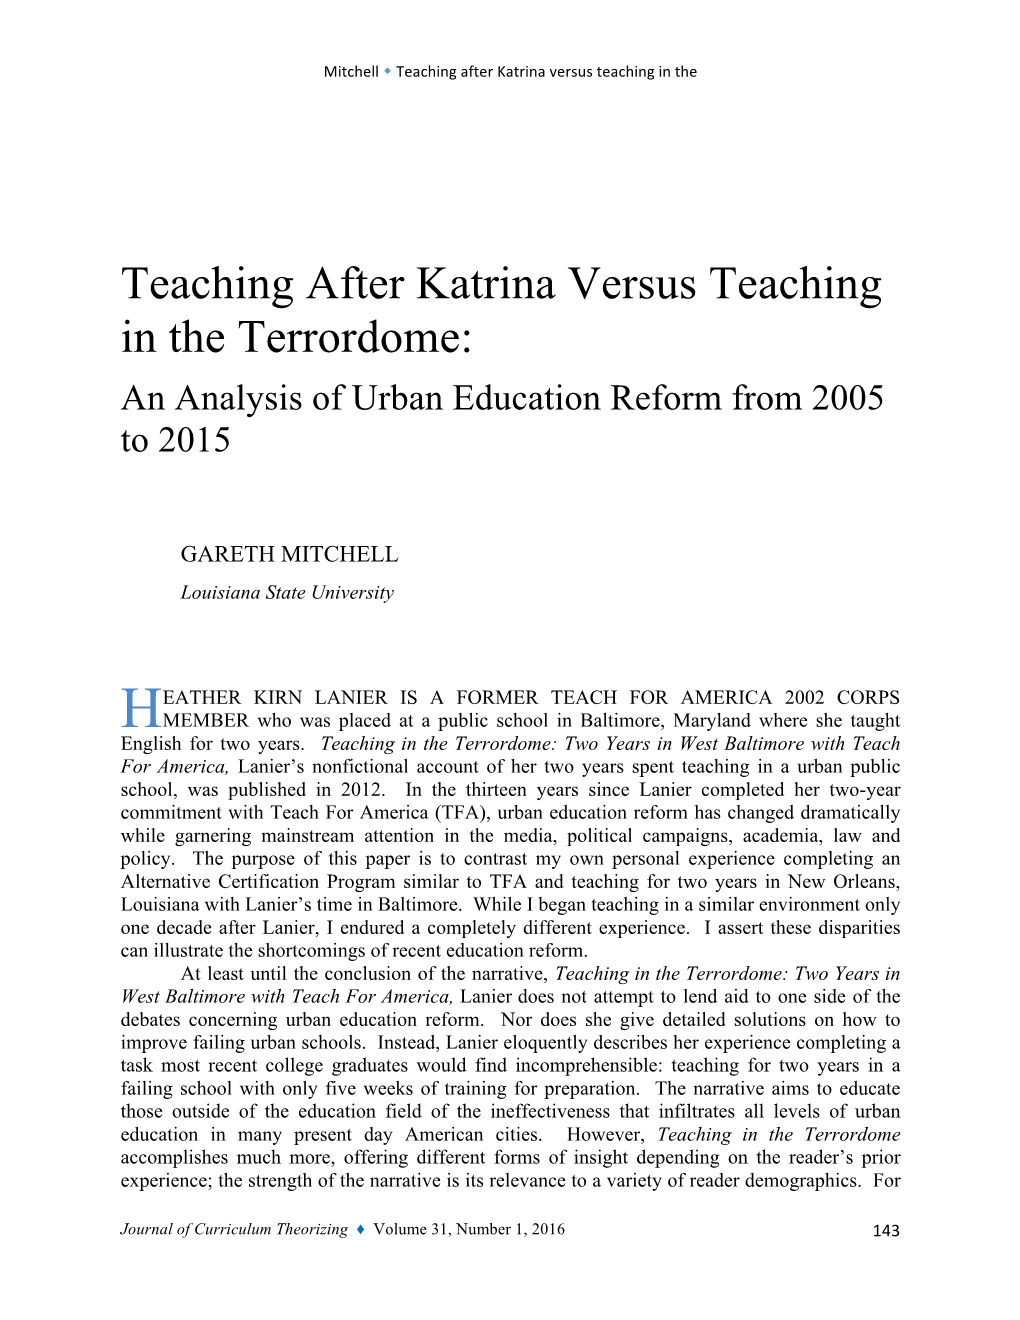 Teaching After Katrina Versus Teaching in the Terrordome: an Analysis of Urban Education Reform from 2005 to 2015